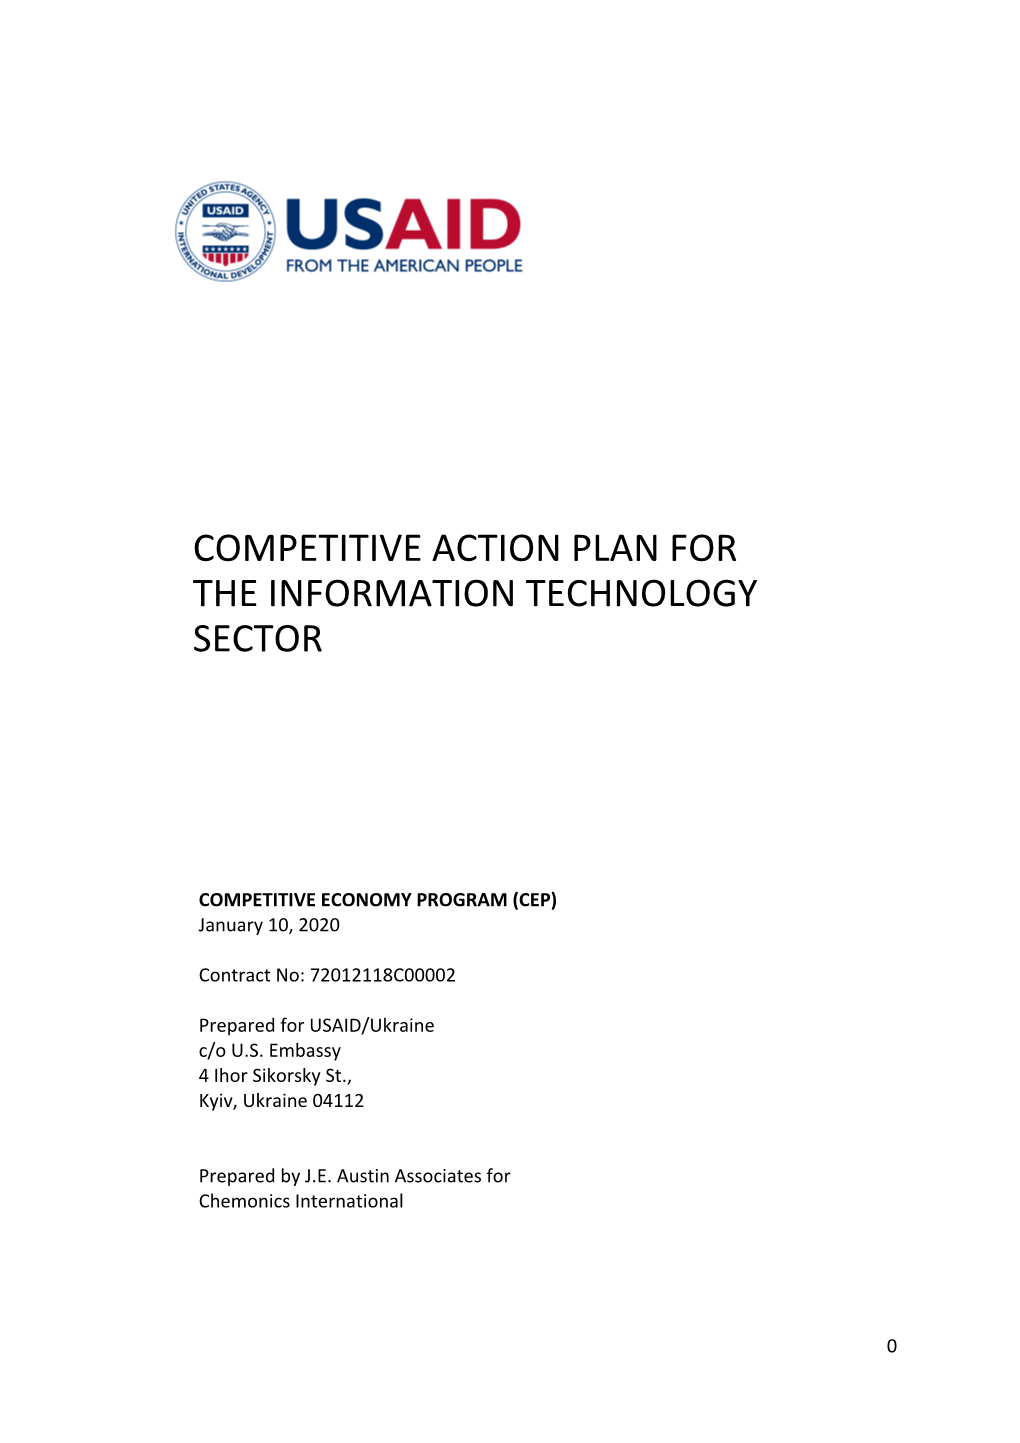 Competitive Action Plan for the Information Technology Sector